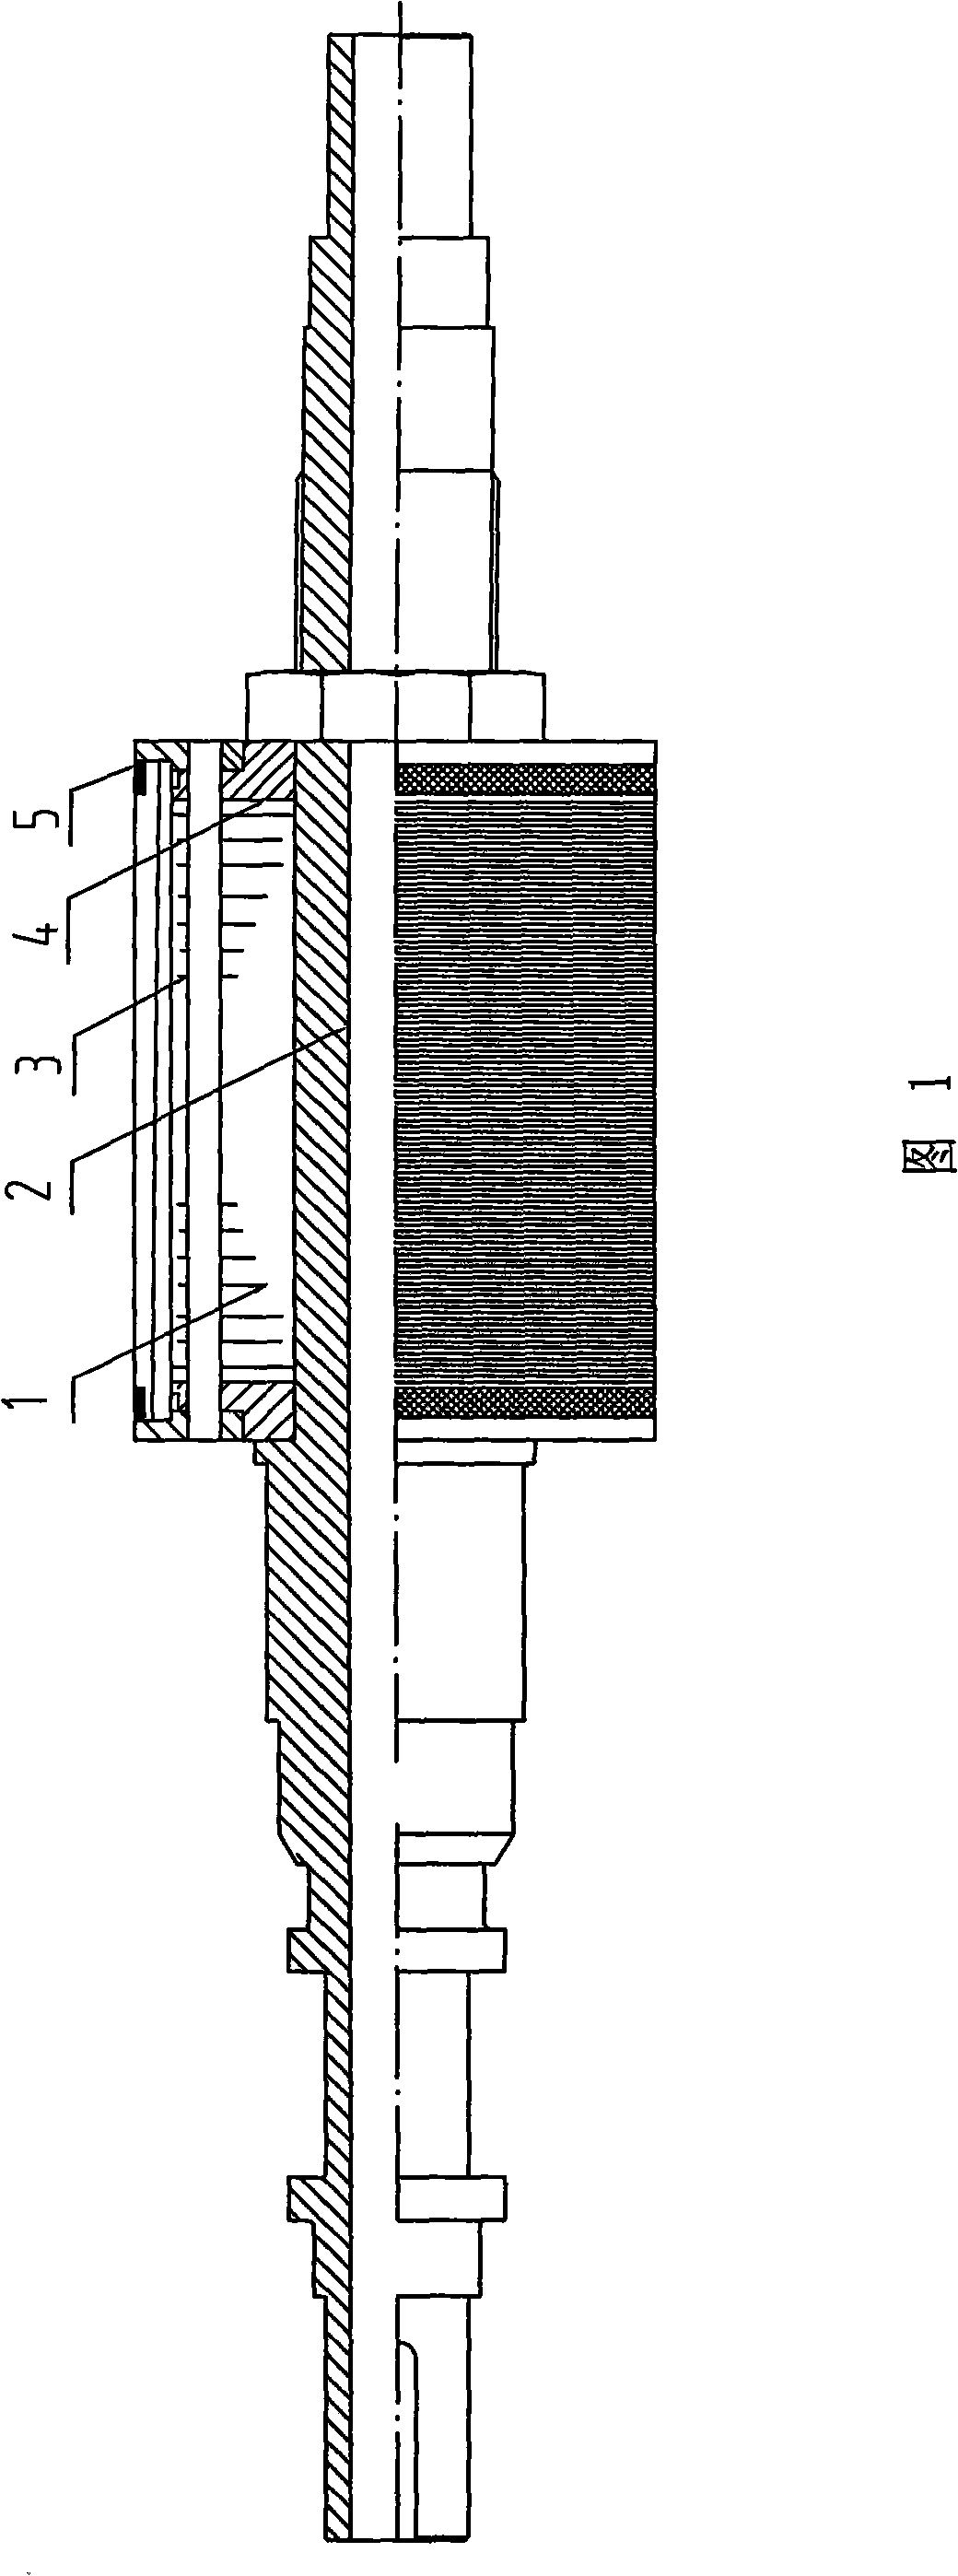 Laminated rotor for high-speed motor